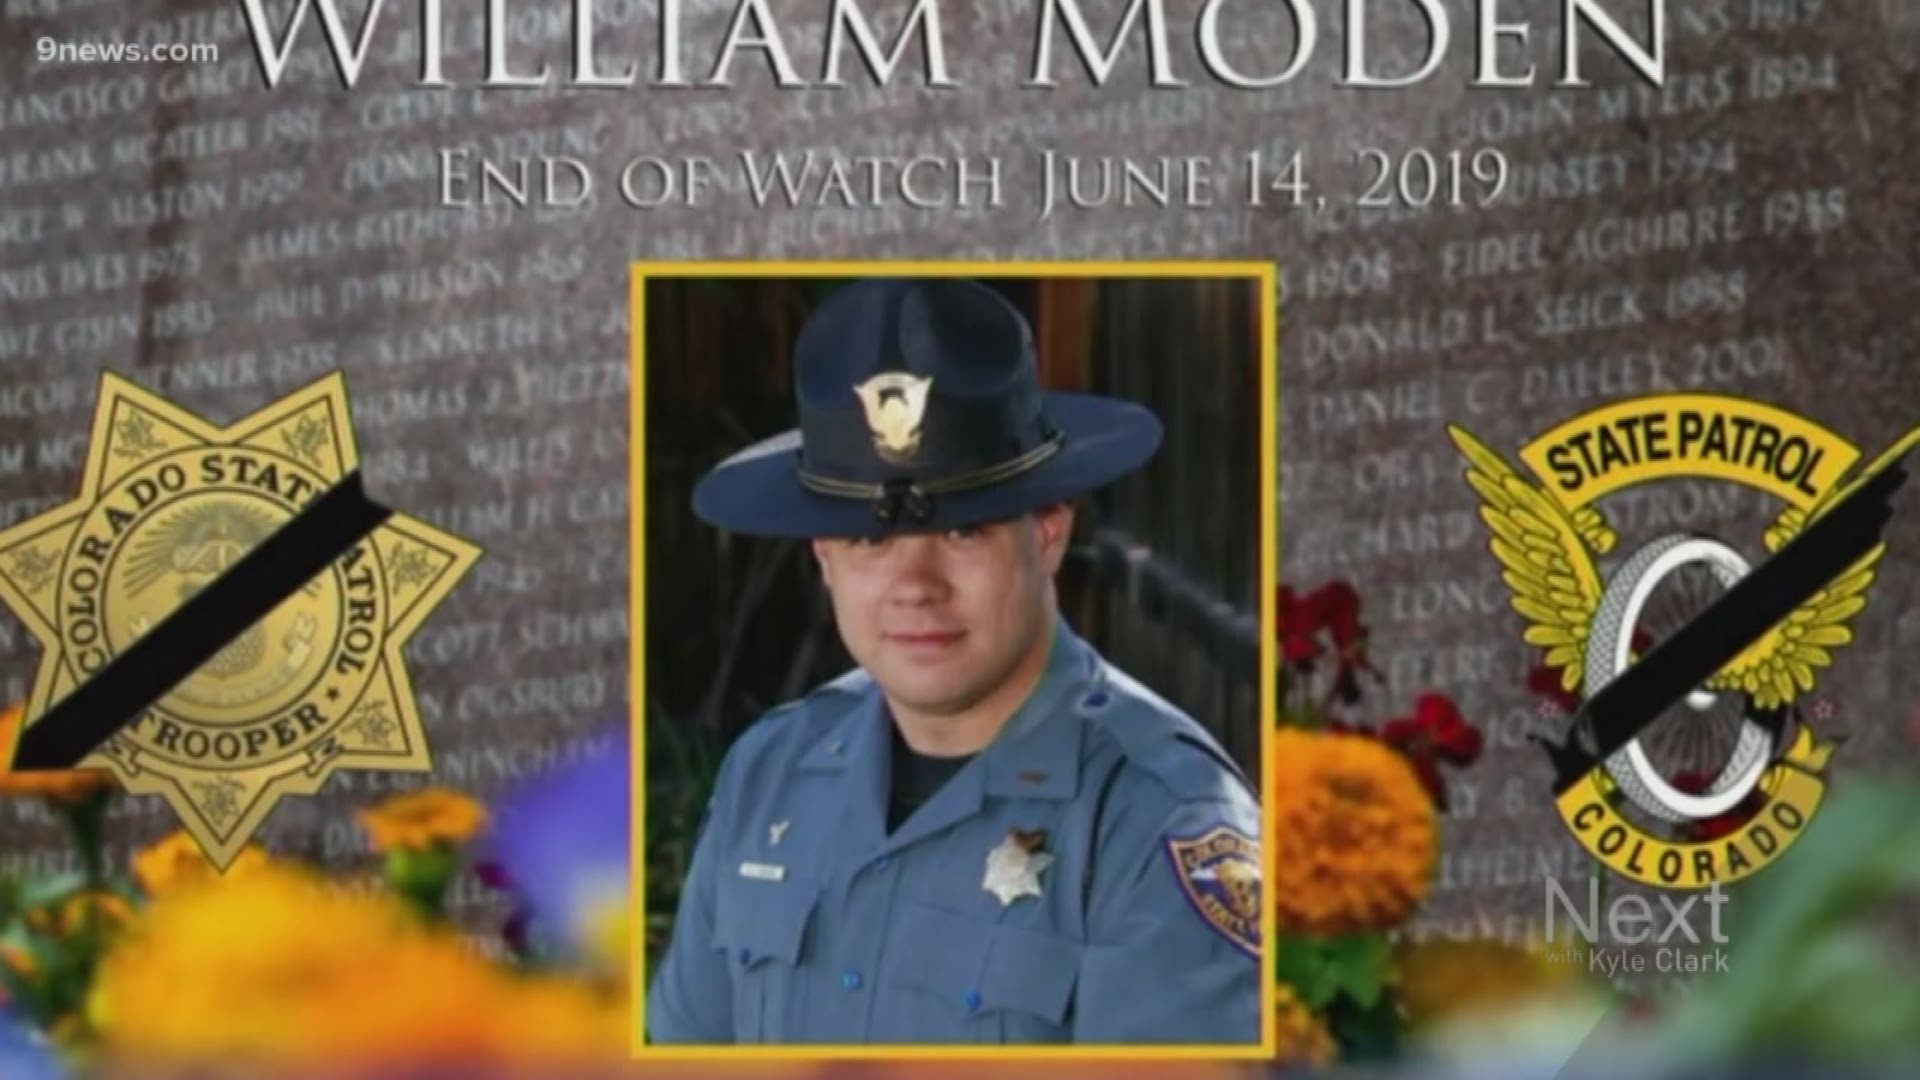 Driver won't be charged in fatal crash that killed Colorado State Patrol Trooper William Moden in June.